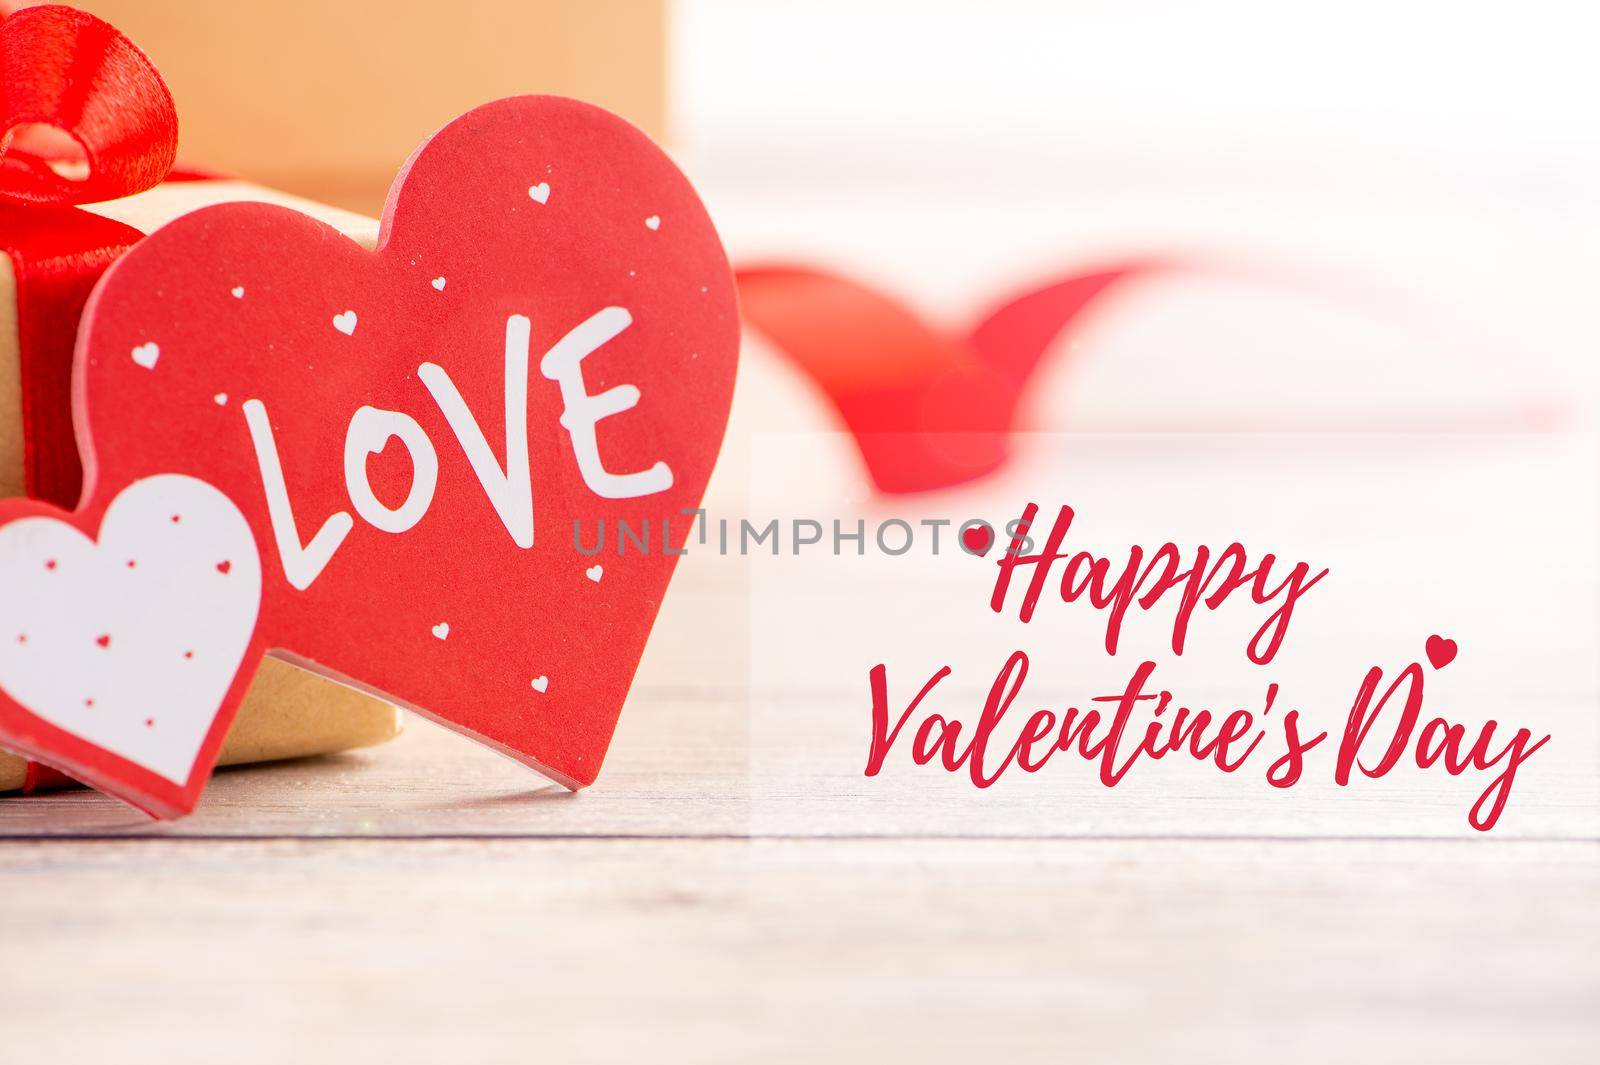 Valentine's Day holiday greeting card, promotion sale design concept with red text, heart shape decoration for happy love, bokeh background, close up. by ROMIXIMAGE